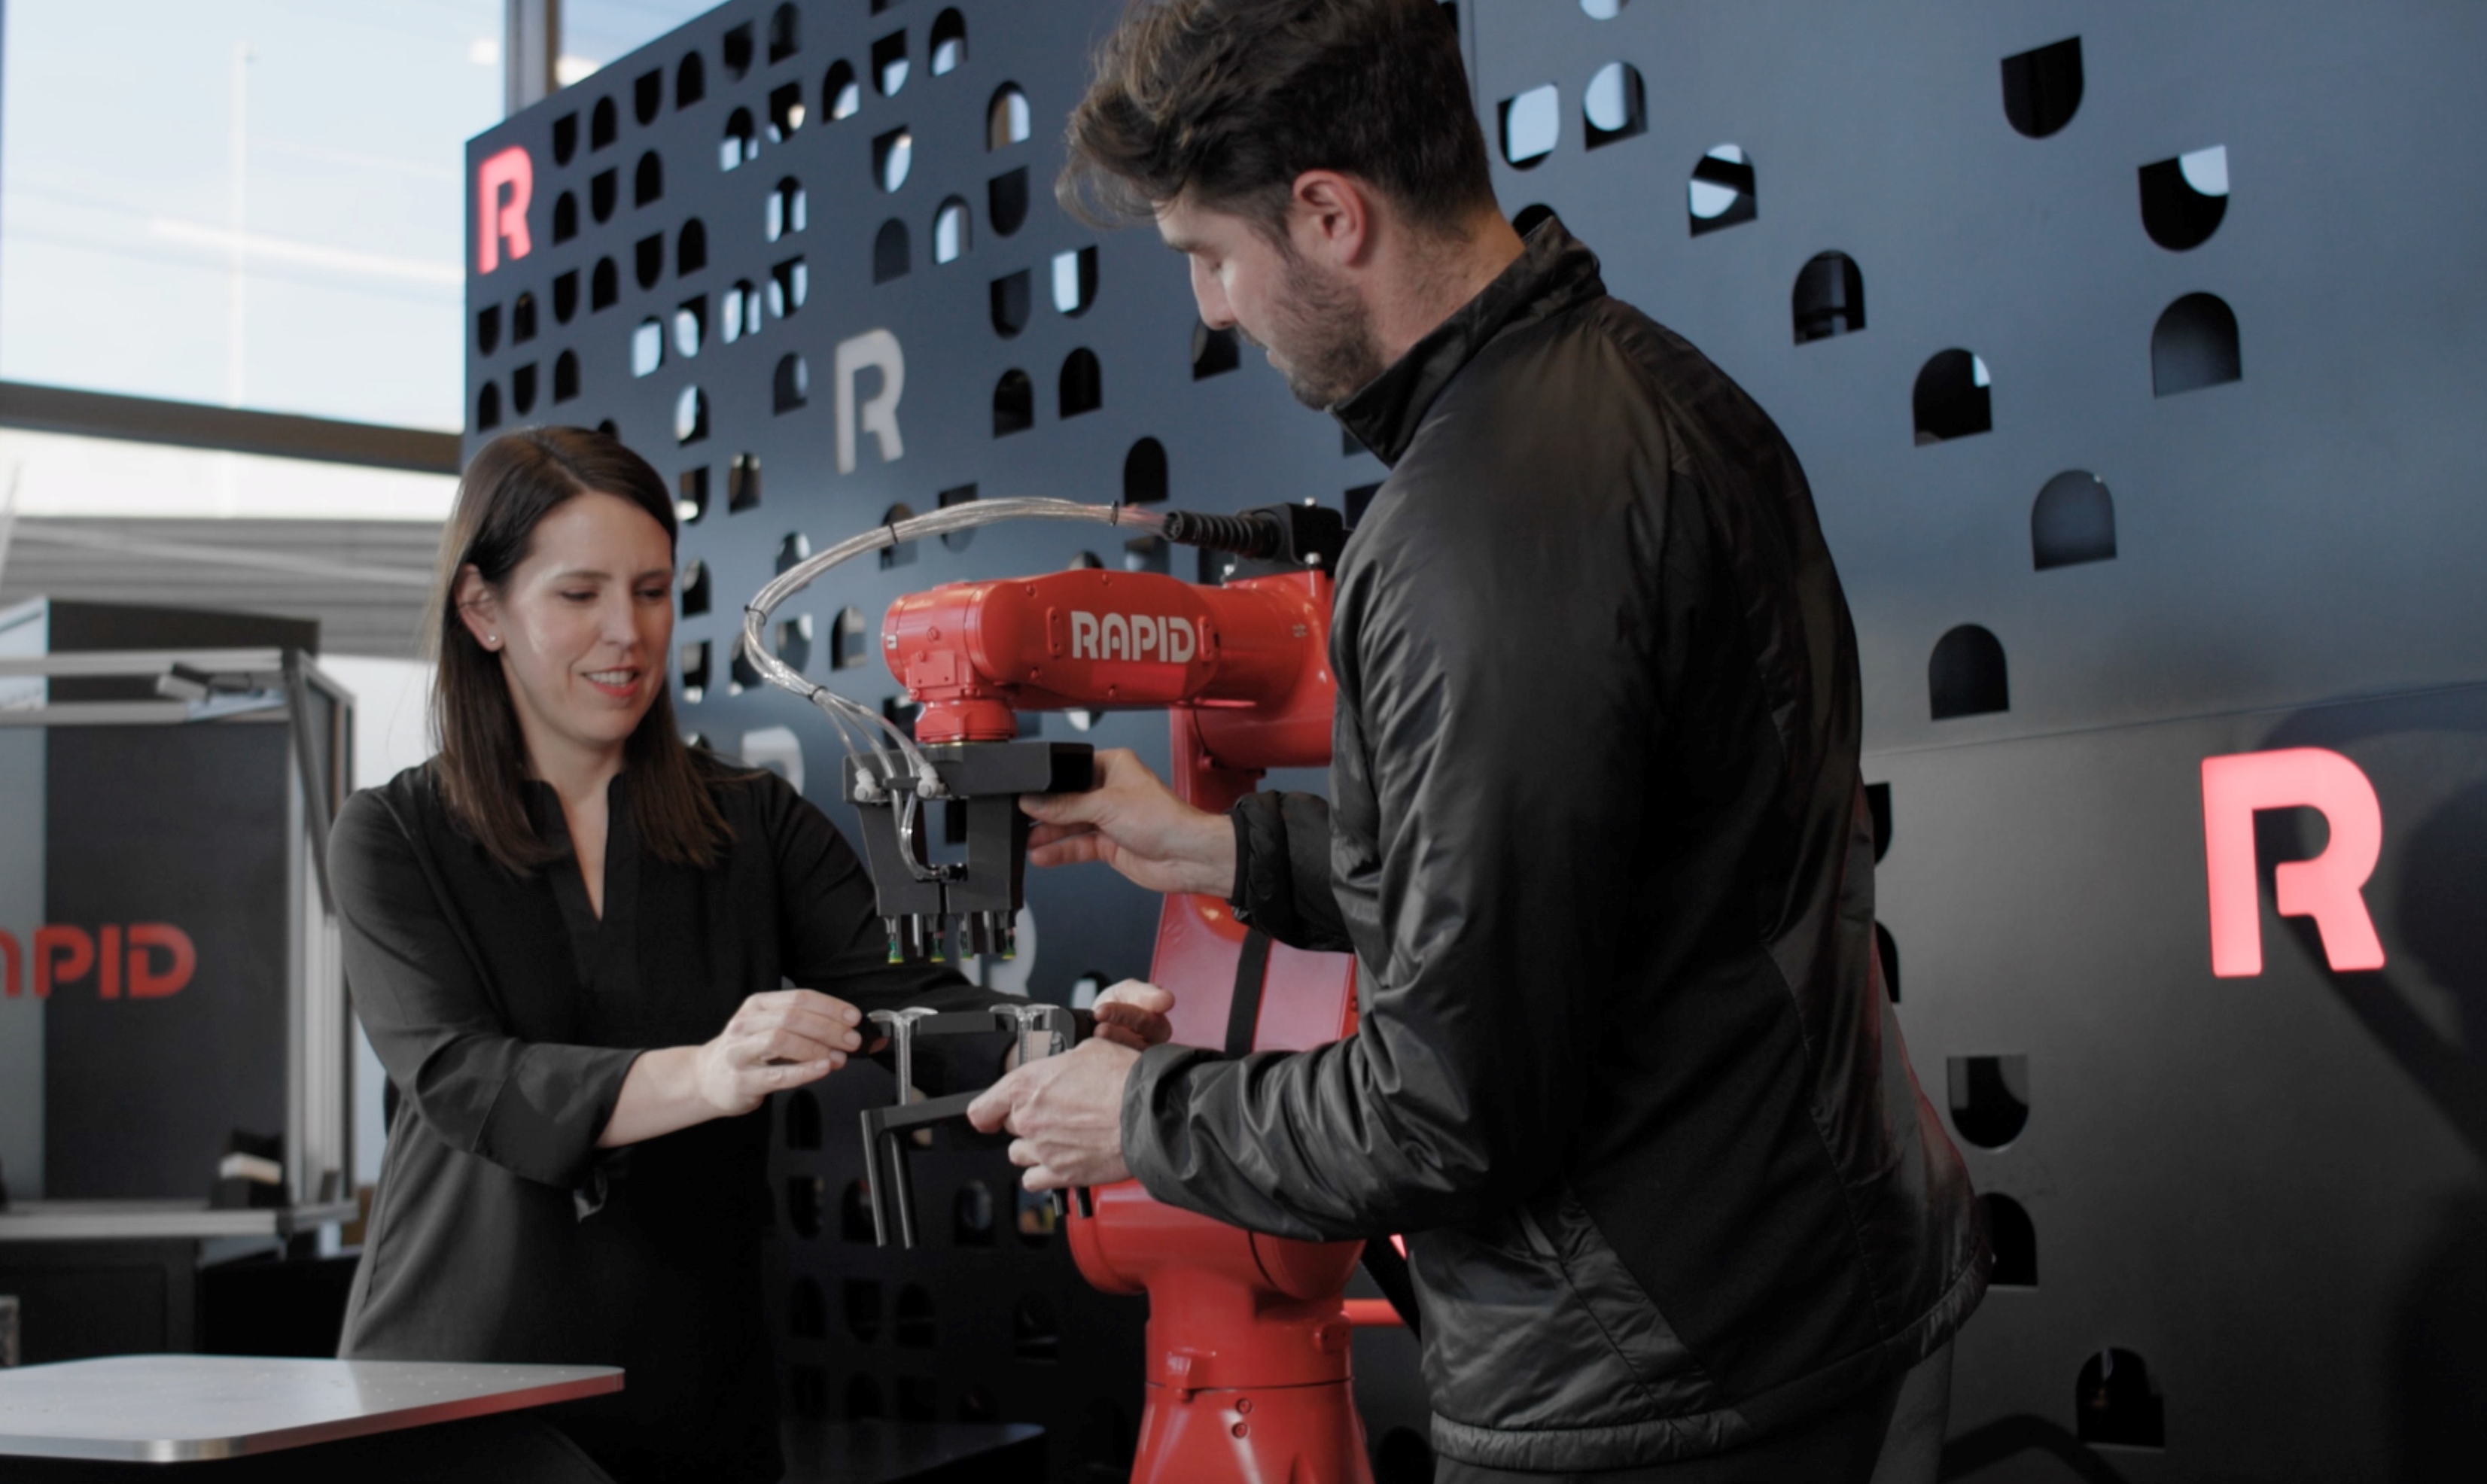 A white woman and a white man both wearing black outfits work together to test a Yaskawa industrial arm with the Rapid logo painted on the side